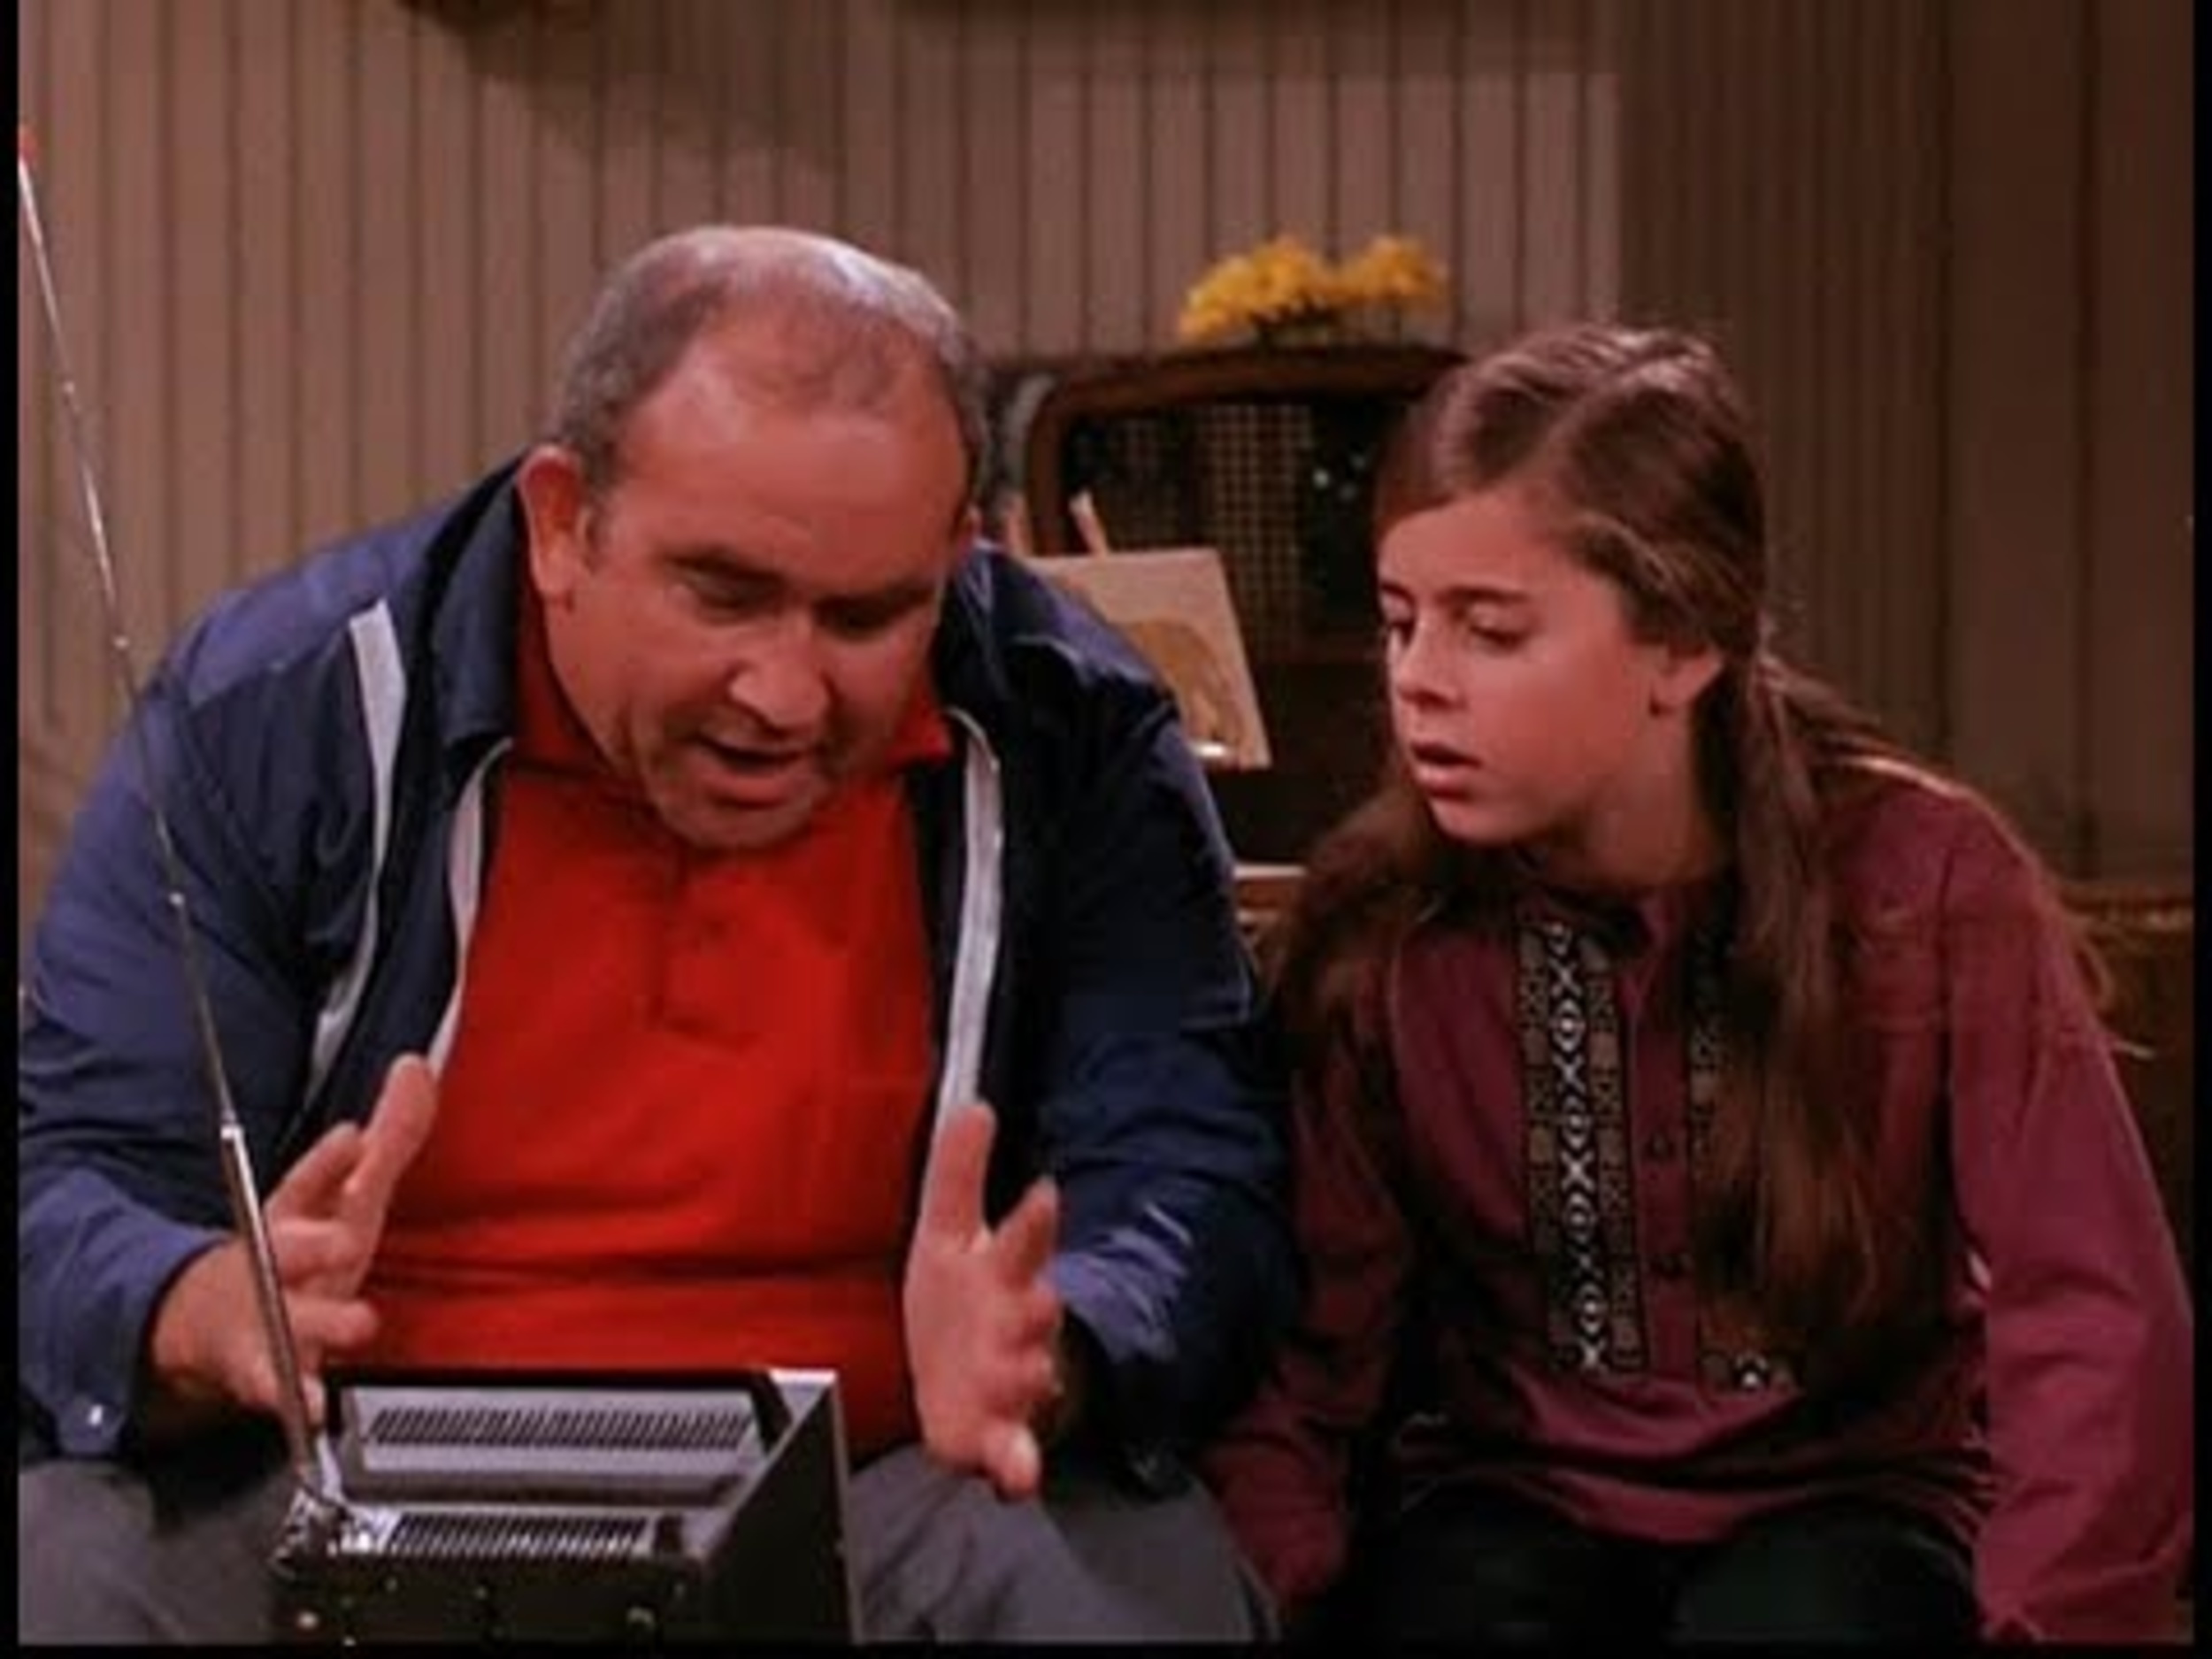 <p>Lou Grant is the perfect foil for Mary Richards, and Ed Asner was absolutely fantastic in the role. He was gruff but lovable, able to get mean but then be sweet in equal measure. That persona plays a perfect role in the humor of “Baby Sit-Com,” where Mary finagles Lou into babysitting Phyllis’ daughter Bess so that she can go on a date instead. Lou and a precocious child? That’s a comedic match we like to see.</p>